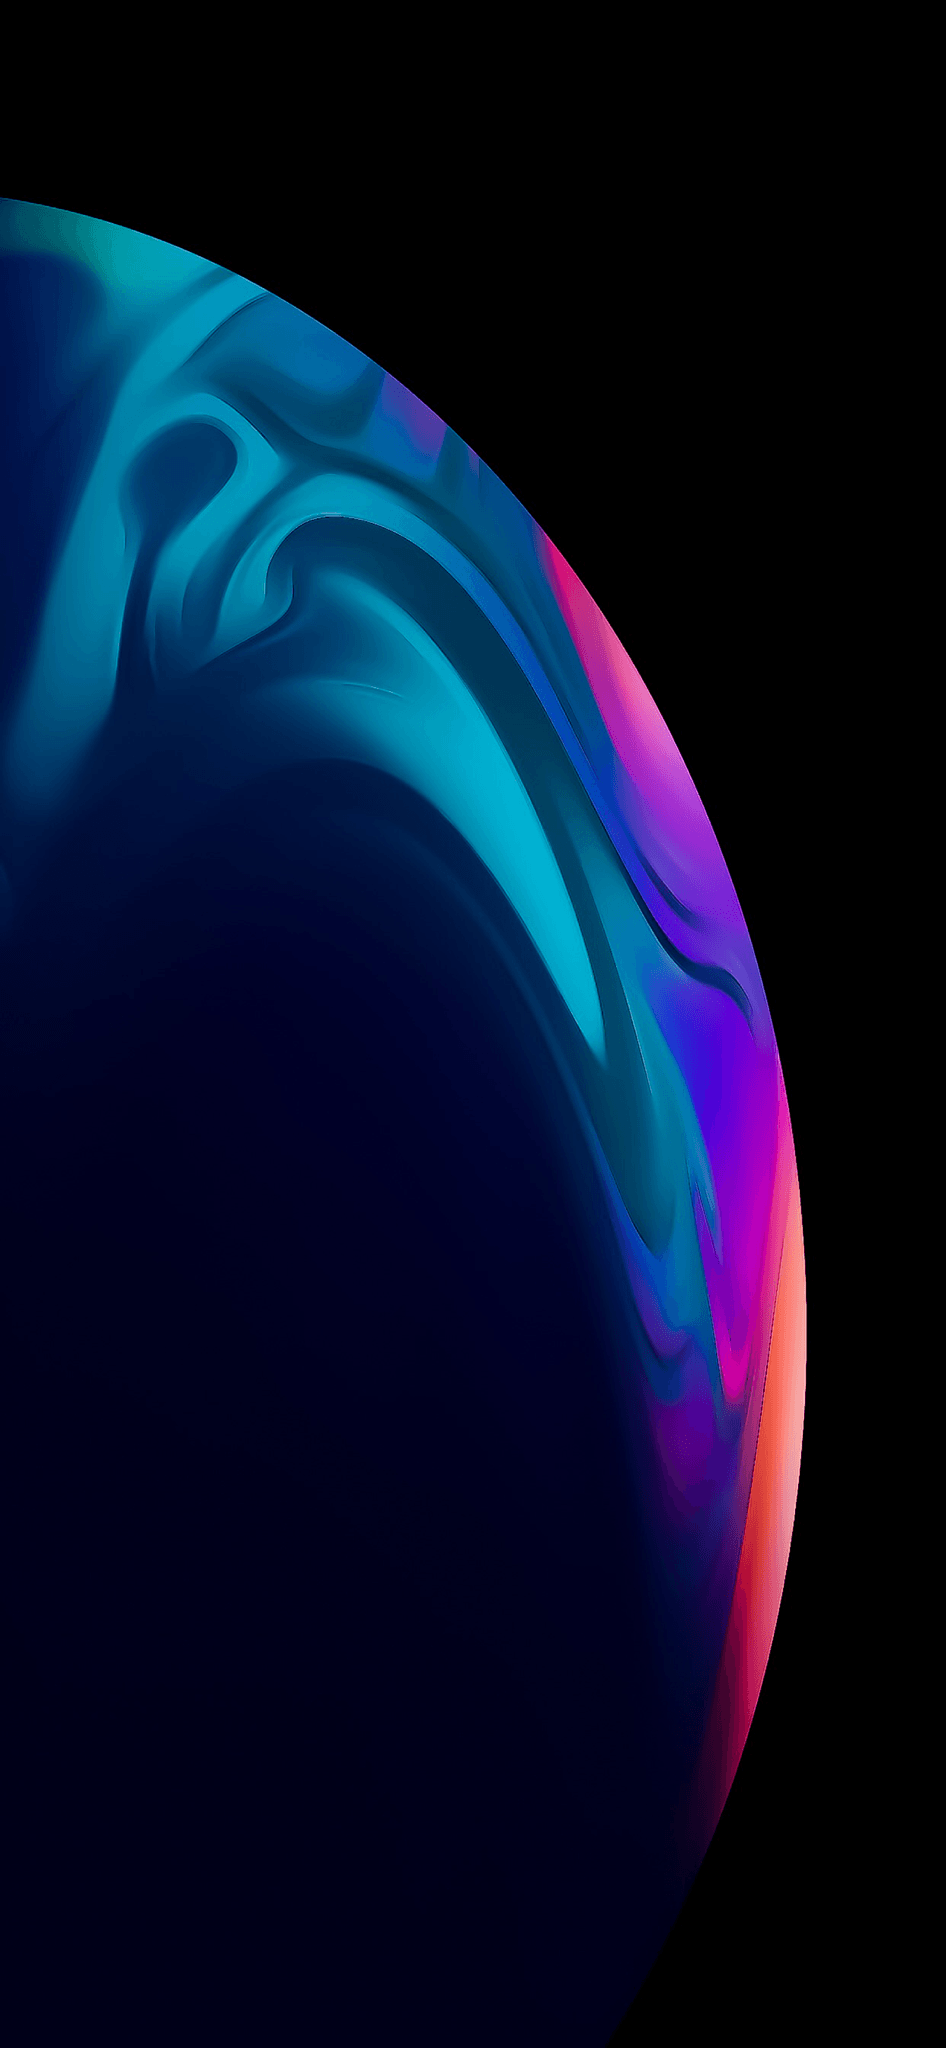 iPhone XR Wallpaper Free iPhone XR Background